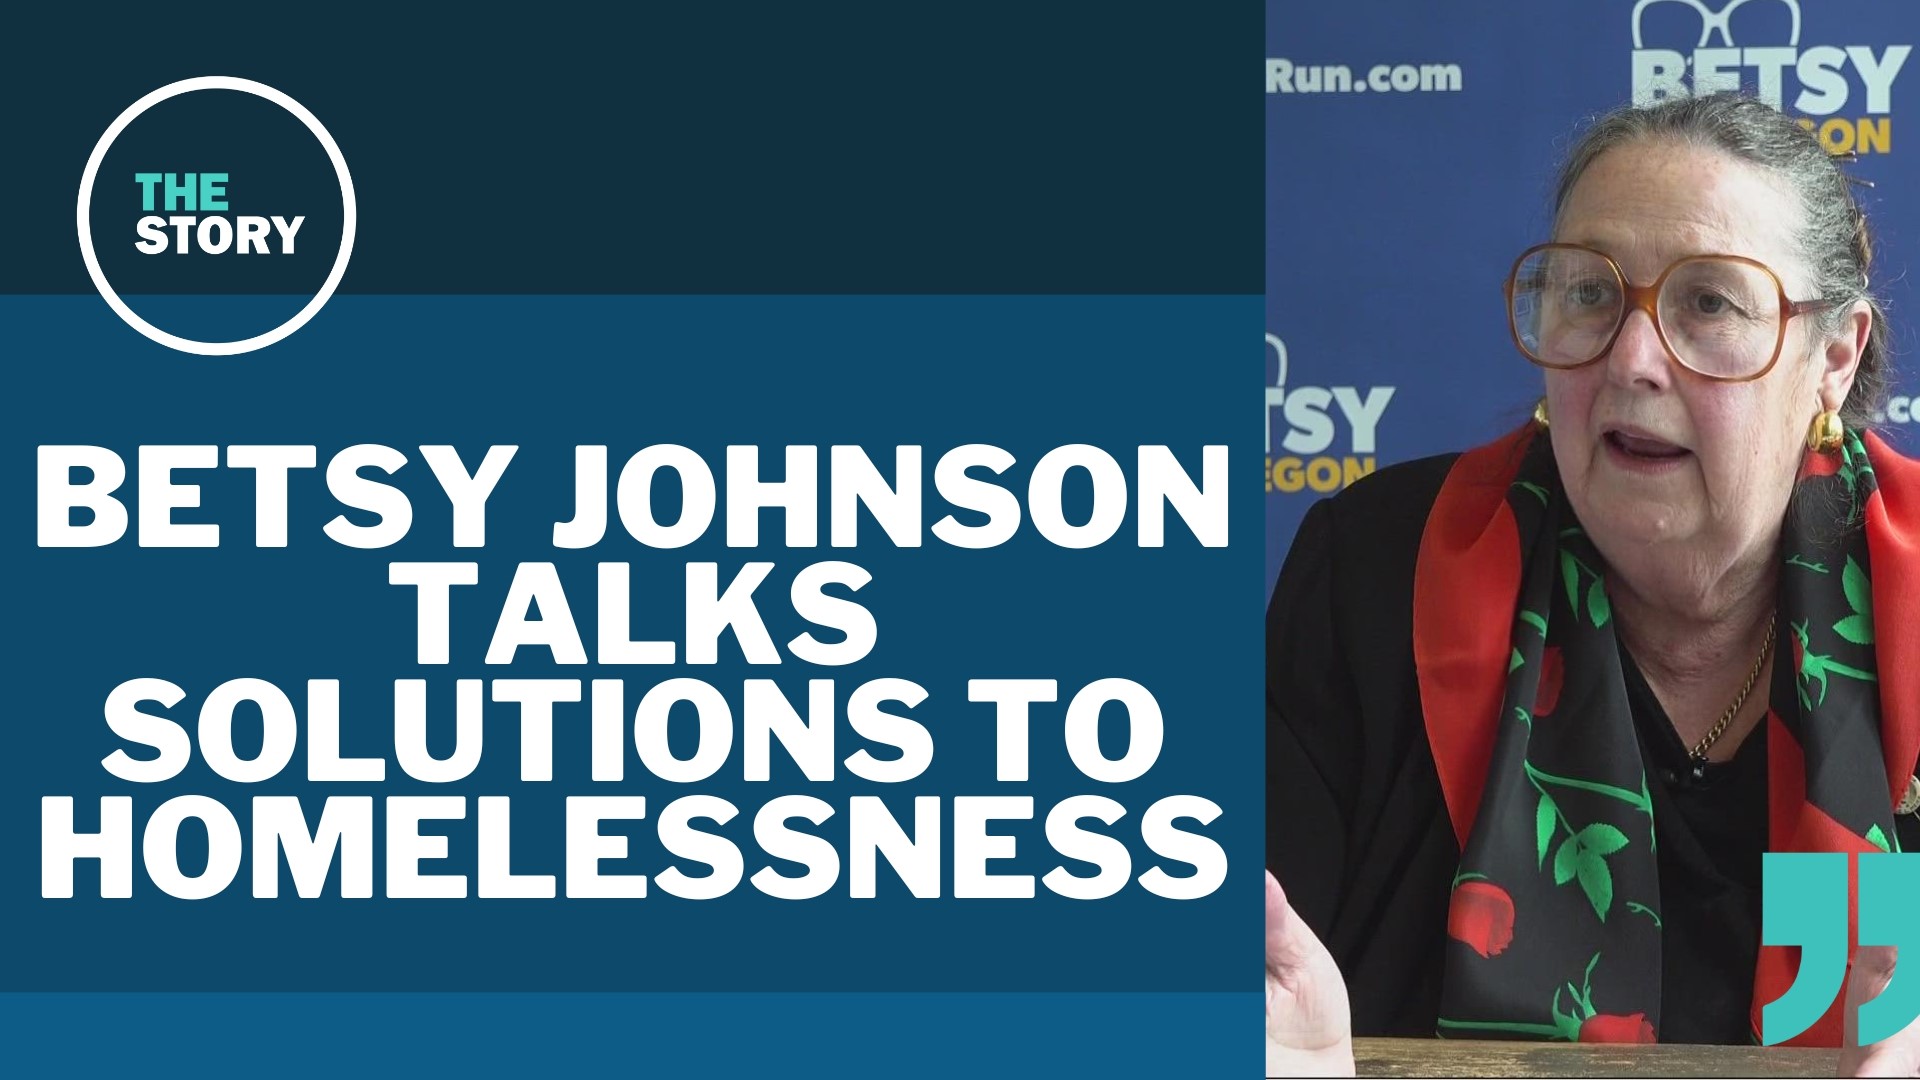 Though formerly a Democratic state senator, Johnson strikes a very different tone on homelessness than her opponents, especially Democrat Tina Kotek.